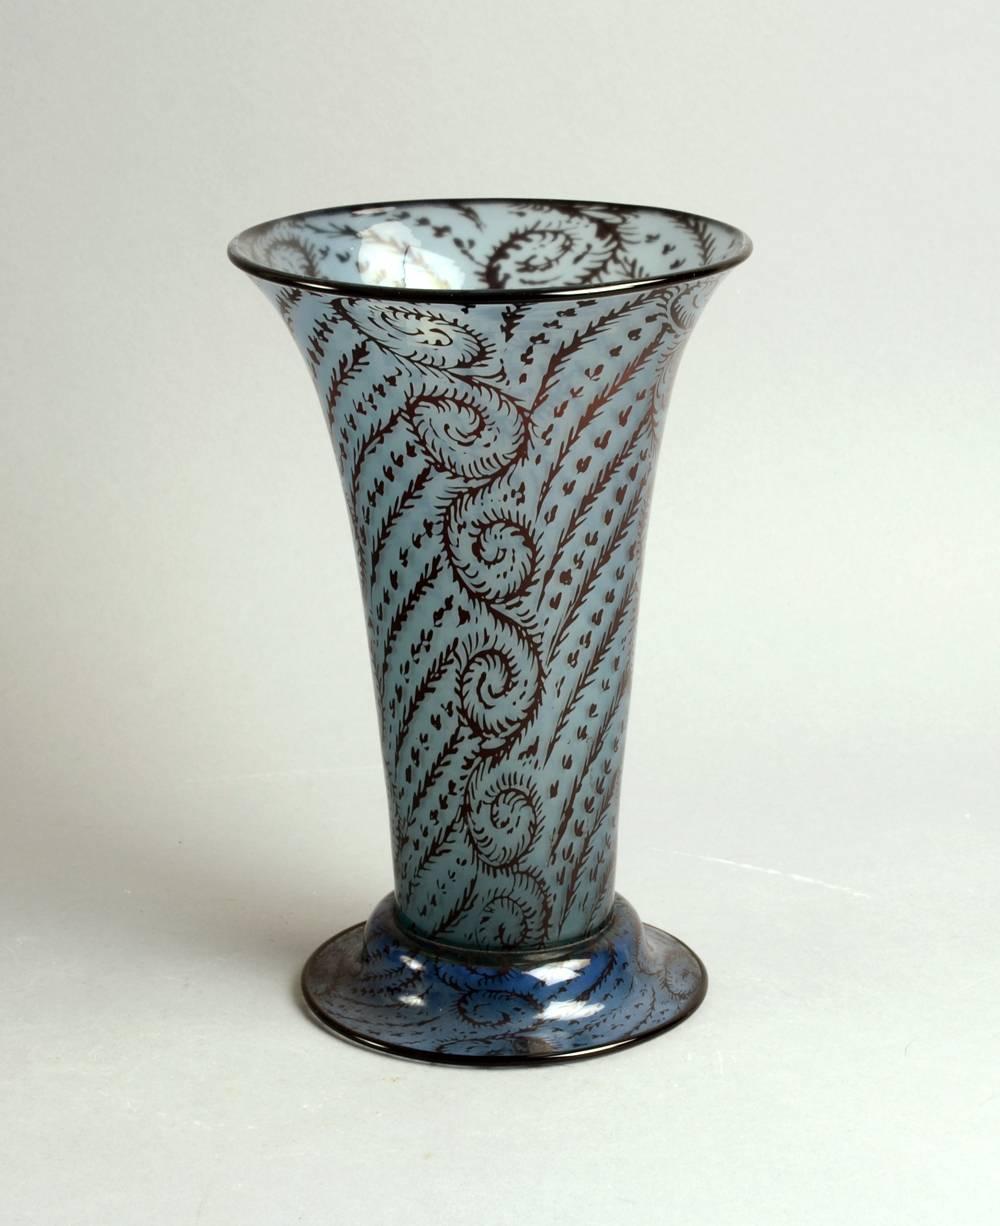 Attributed to Simon Gate or Edward Hald for Orrefors.
Extremely early, experimental "Graal" vase in blue and red glass, circa 1910s-1920s.
Engraved "Orrefors 23"
Excellent condition, no chips, cracks or repairs.
 